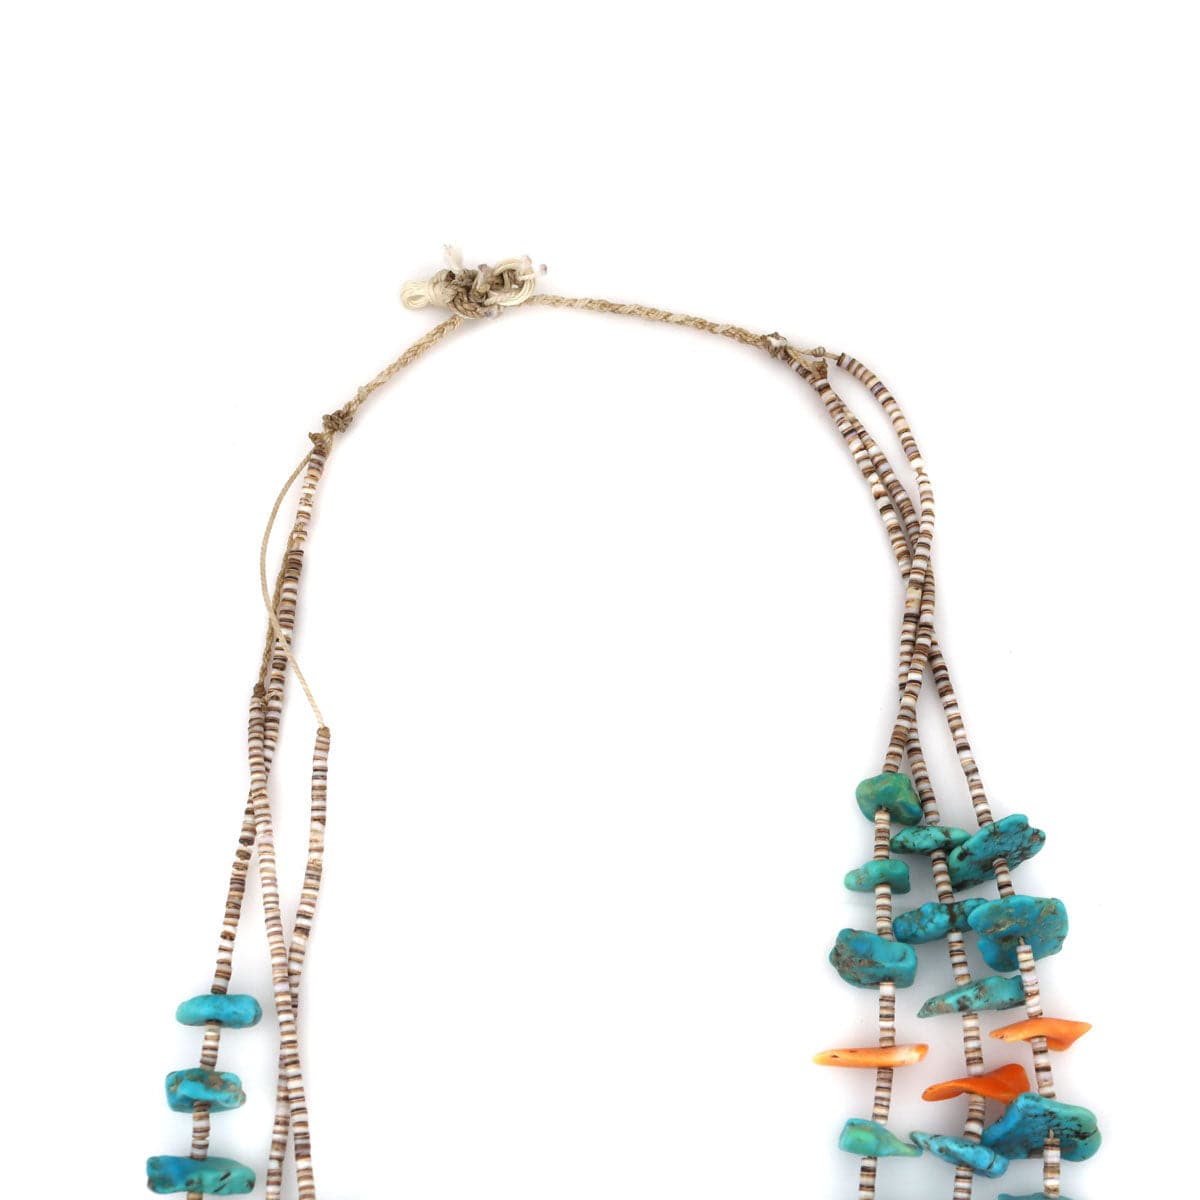 Navajo 3-Strand Turquoise, Spiny Oyster, and Heishi Necklace with Jocla Pendants c. 1960s, 30" length (J91993C-0921-015)2